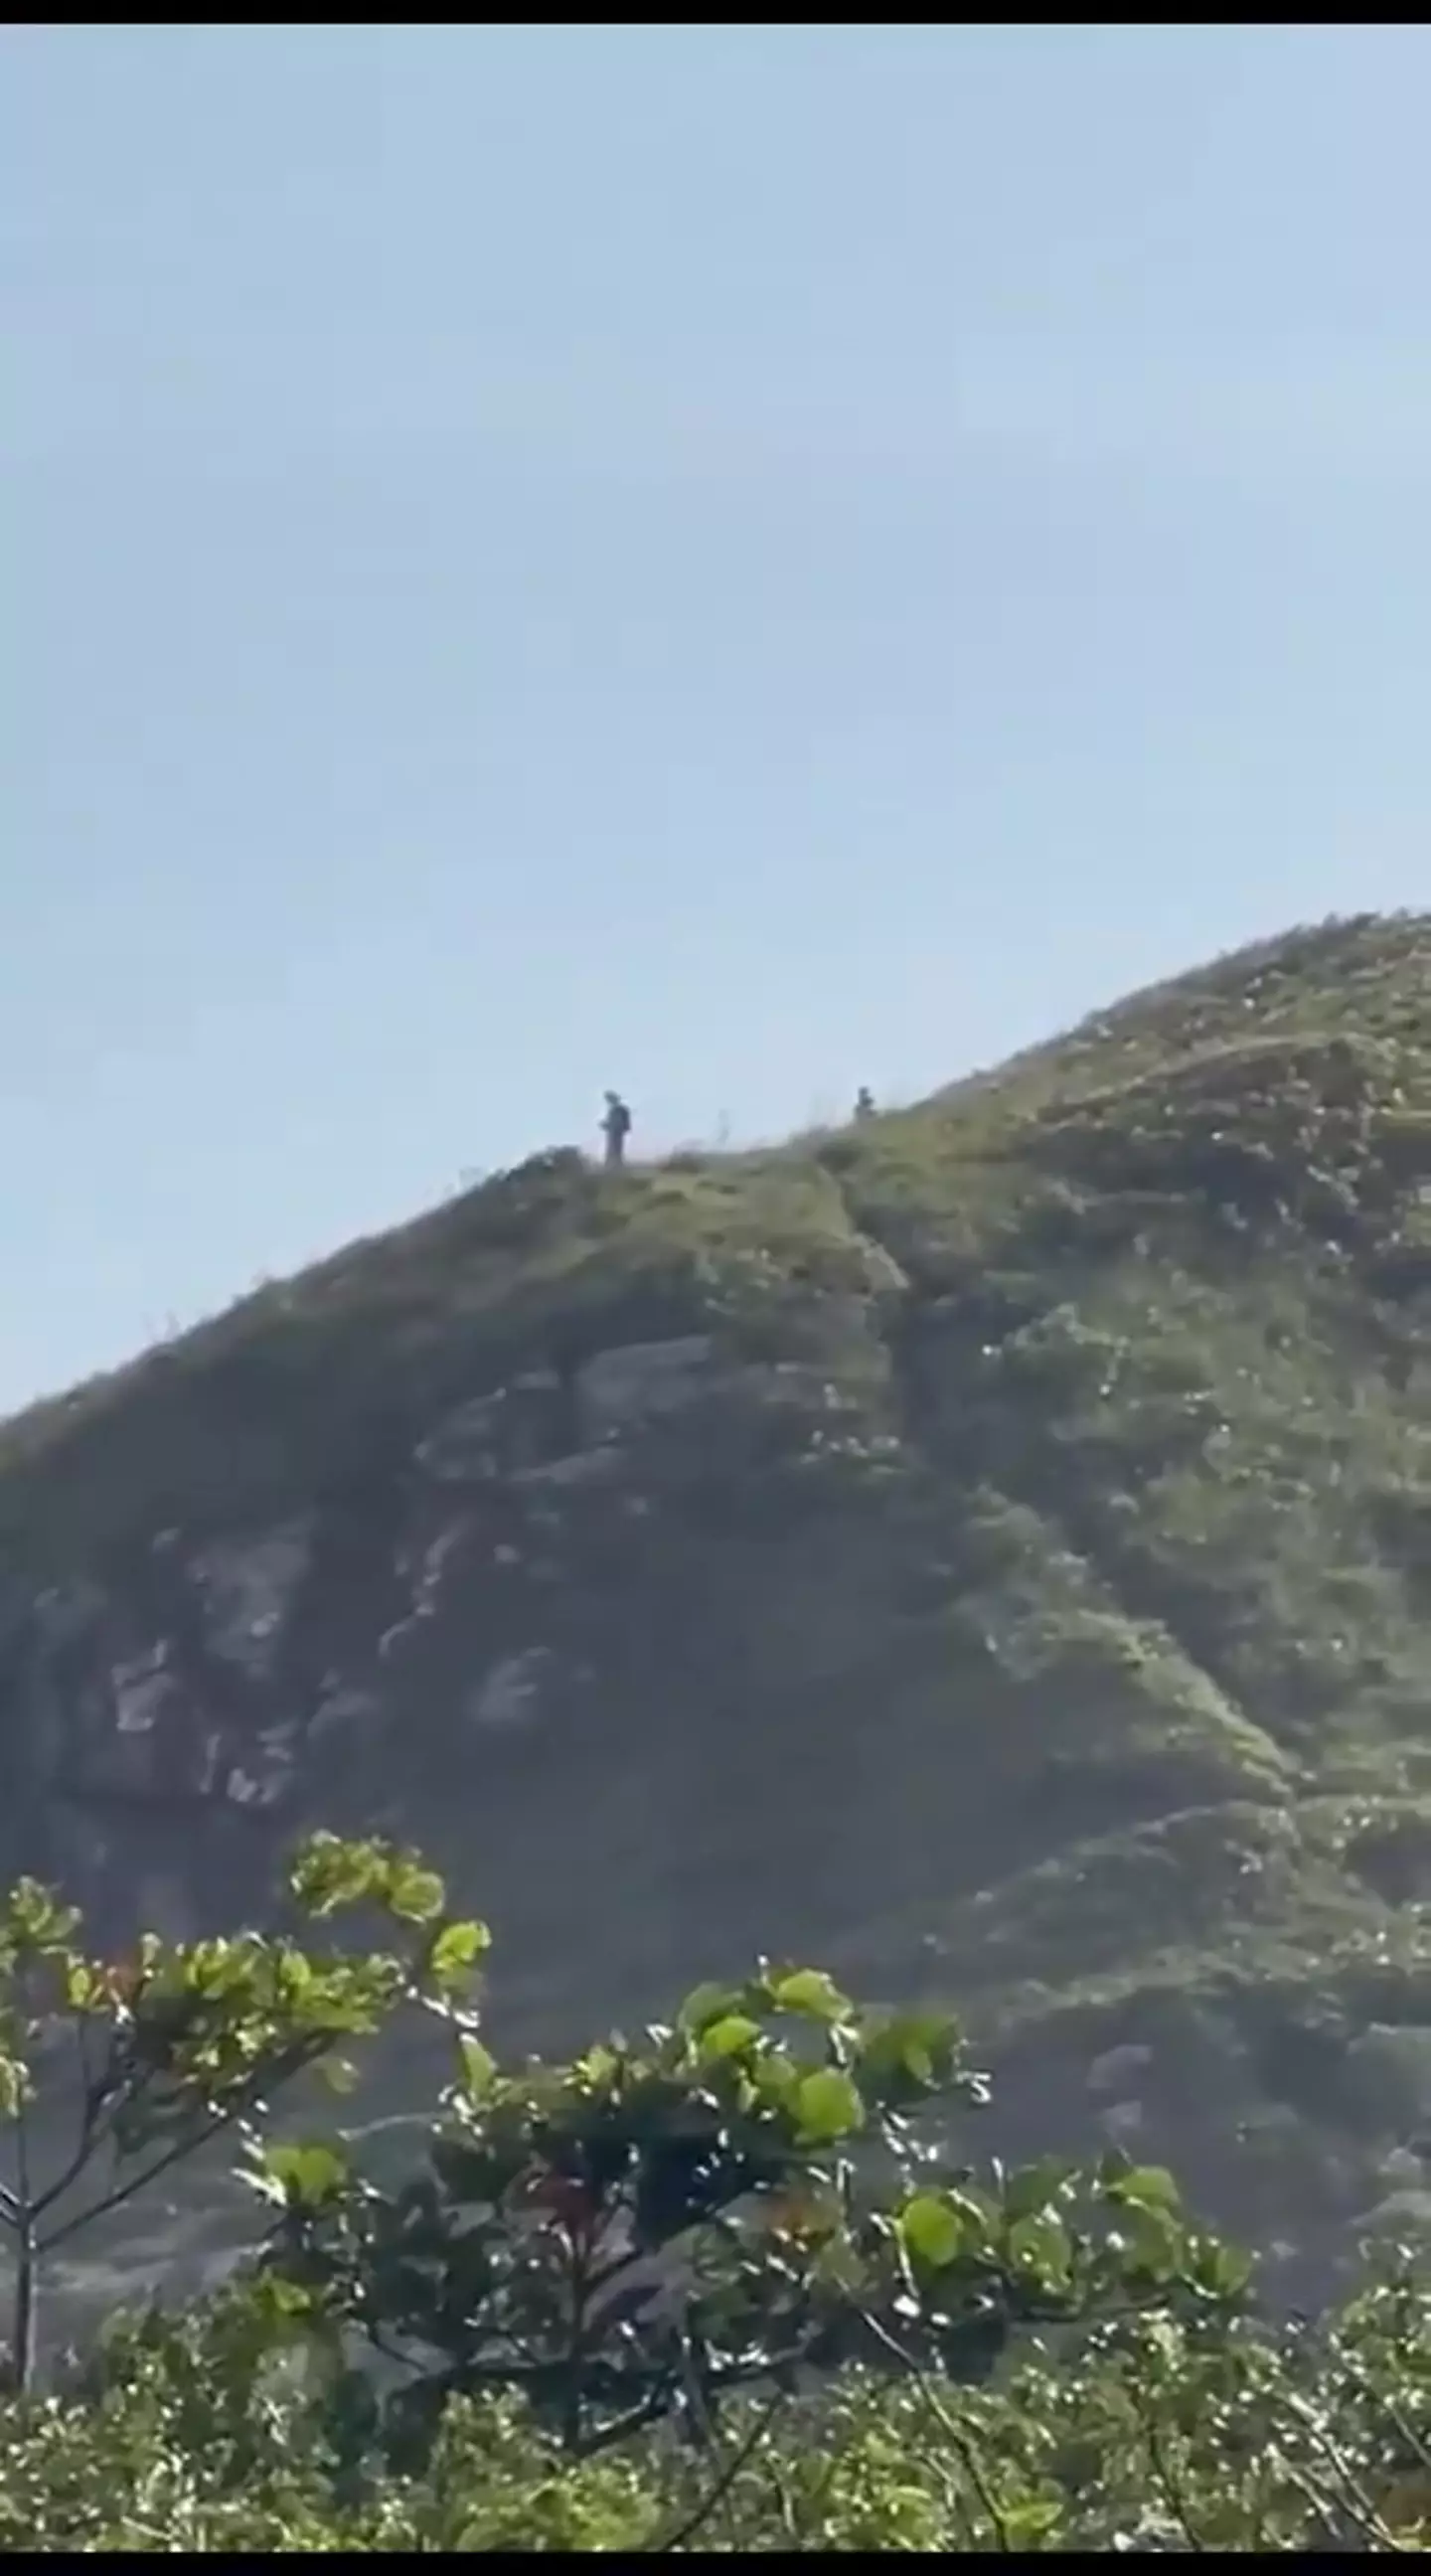 Sara Dalete from Brasília caught the footage while hiking.